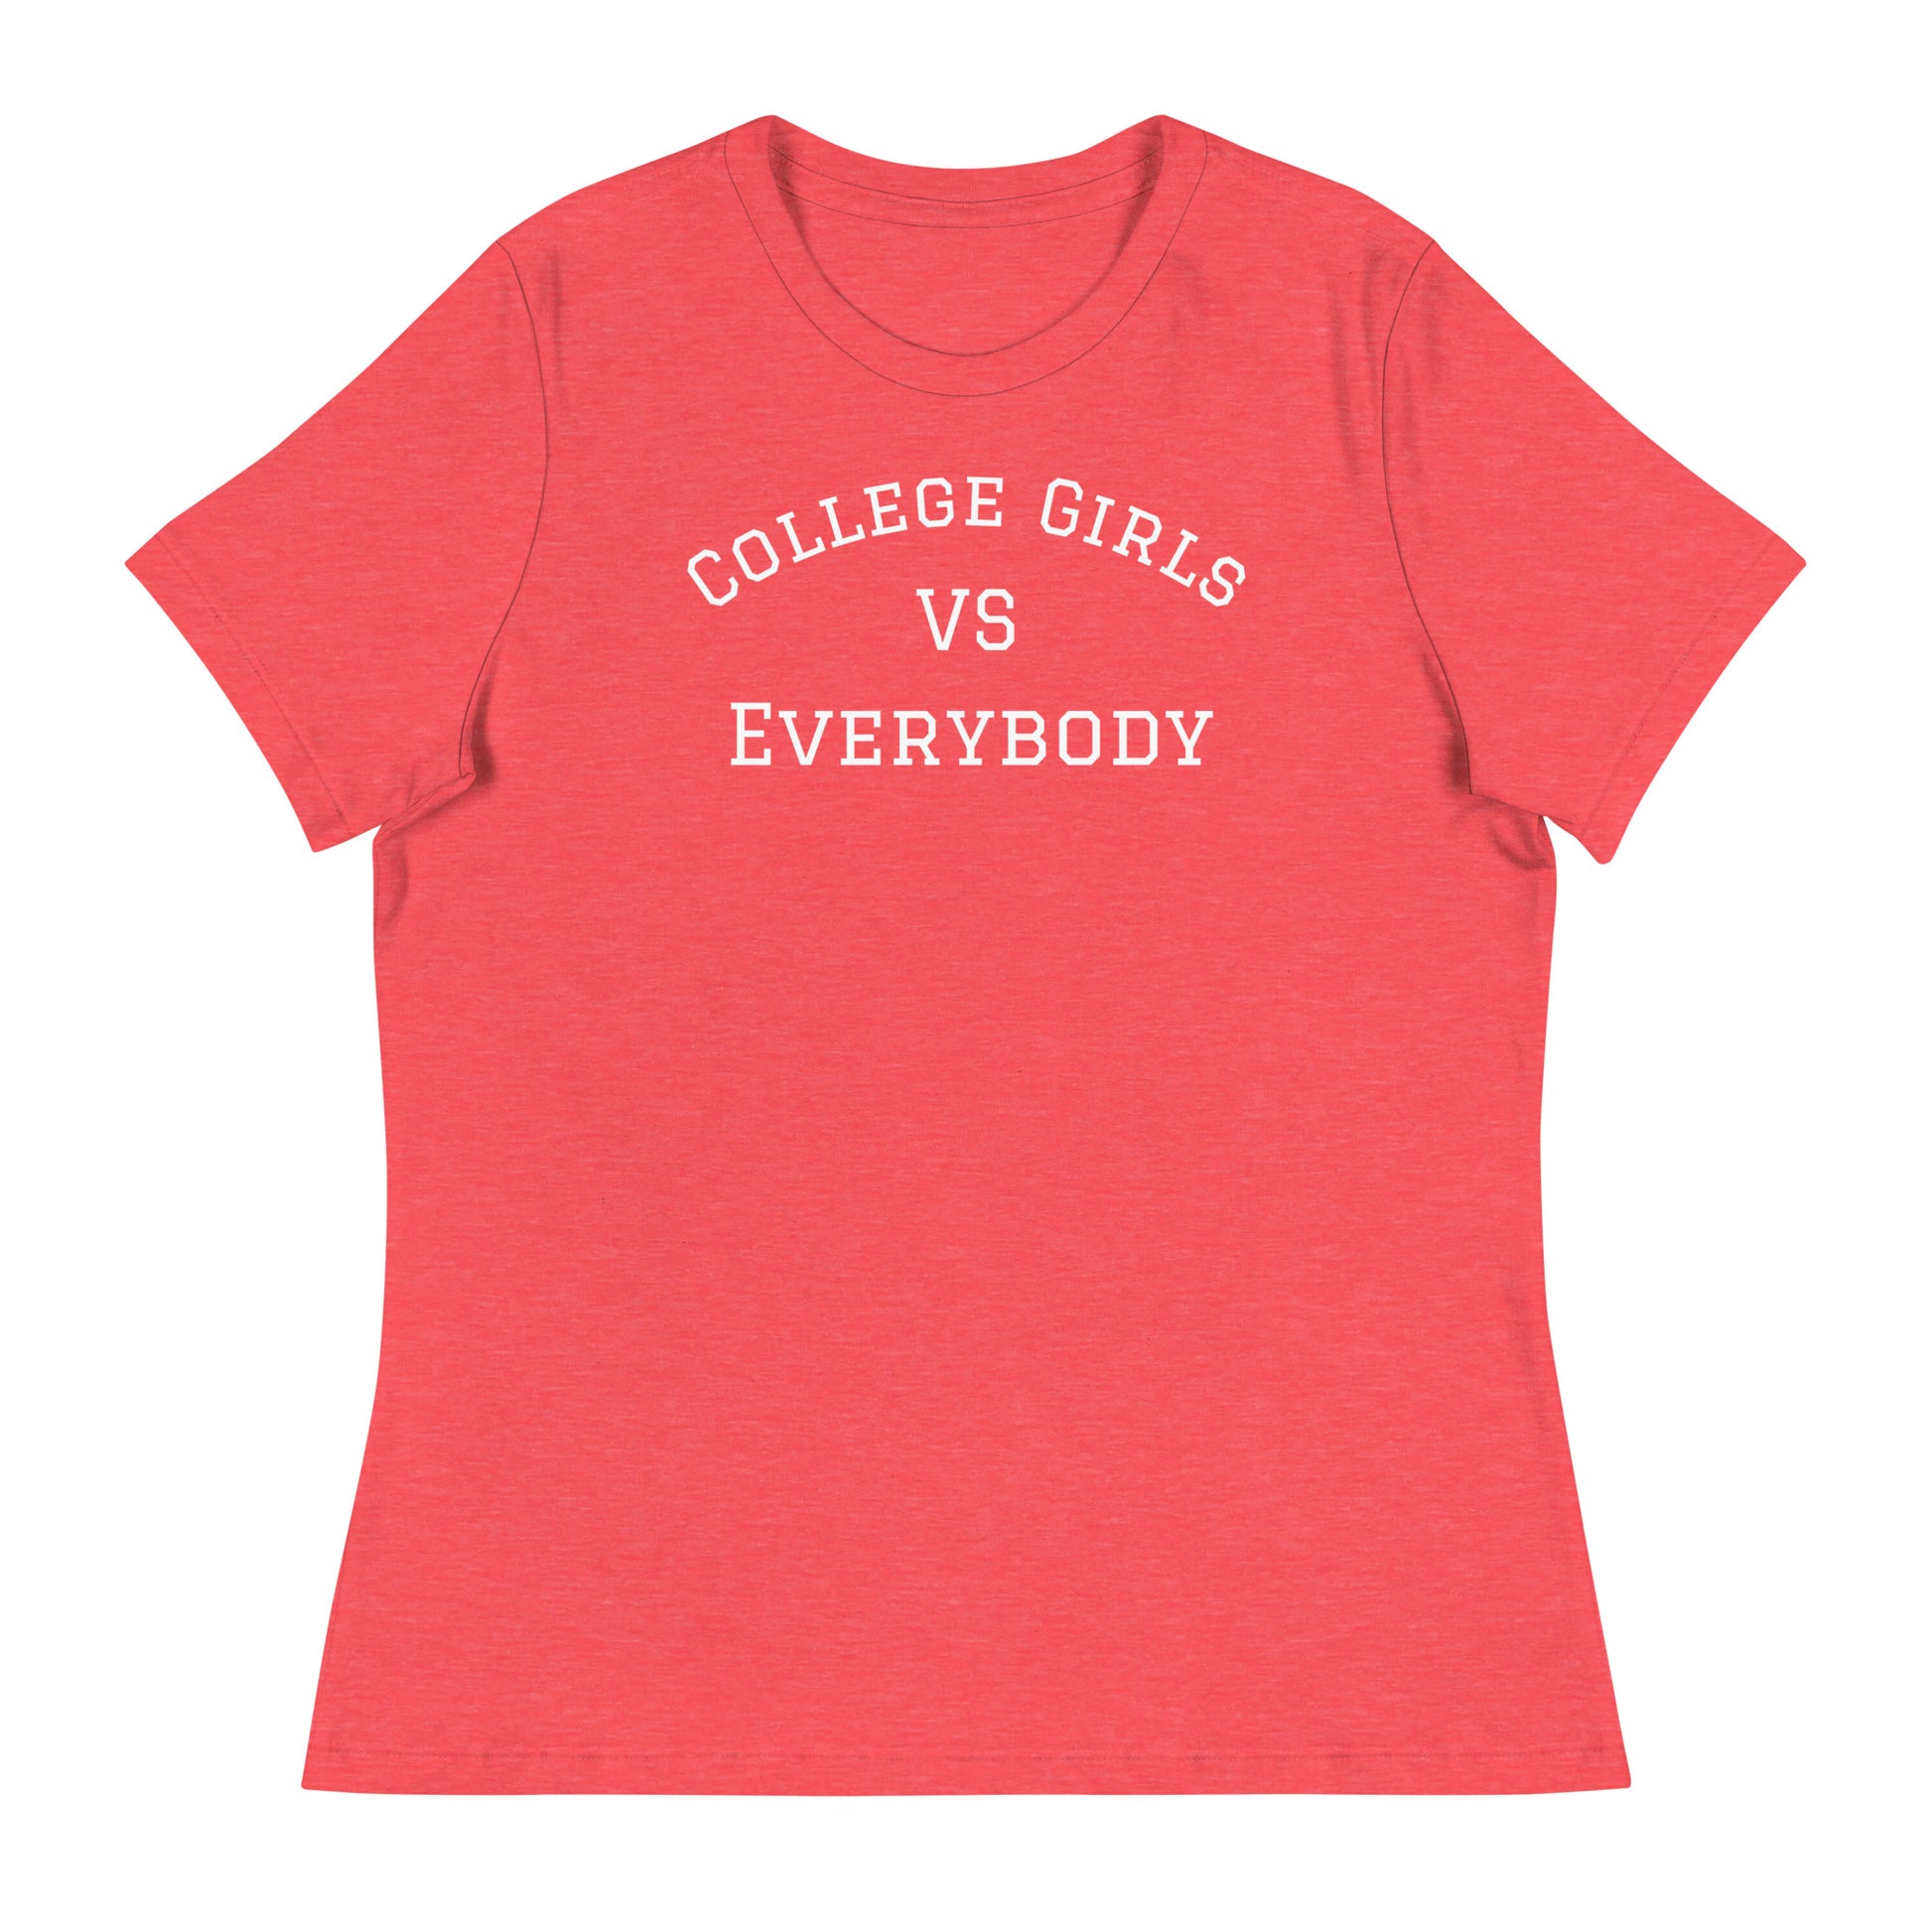 Best women's short sleeve college-casual heather red tee shirt that celebrates college girls